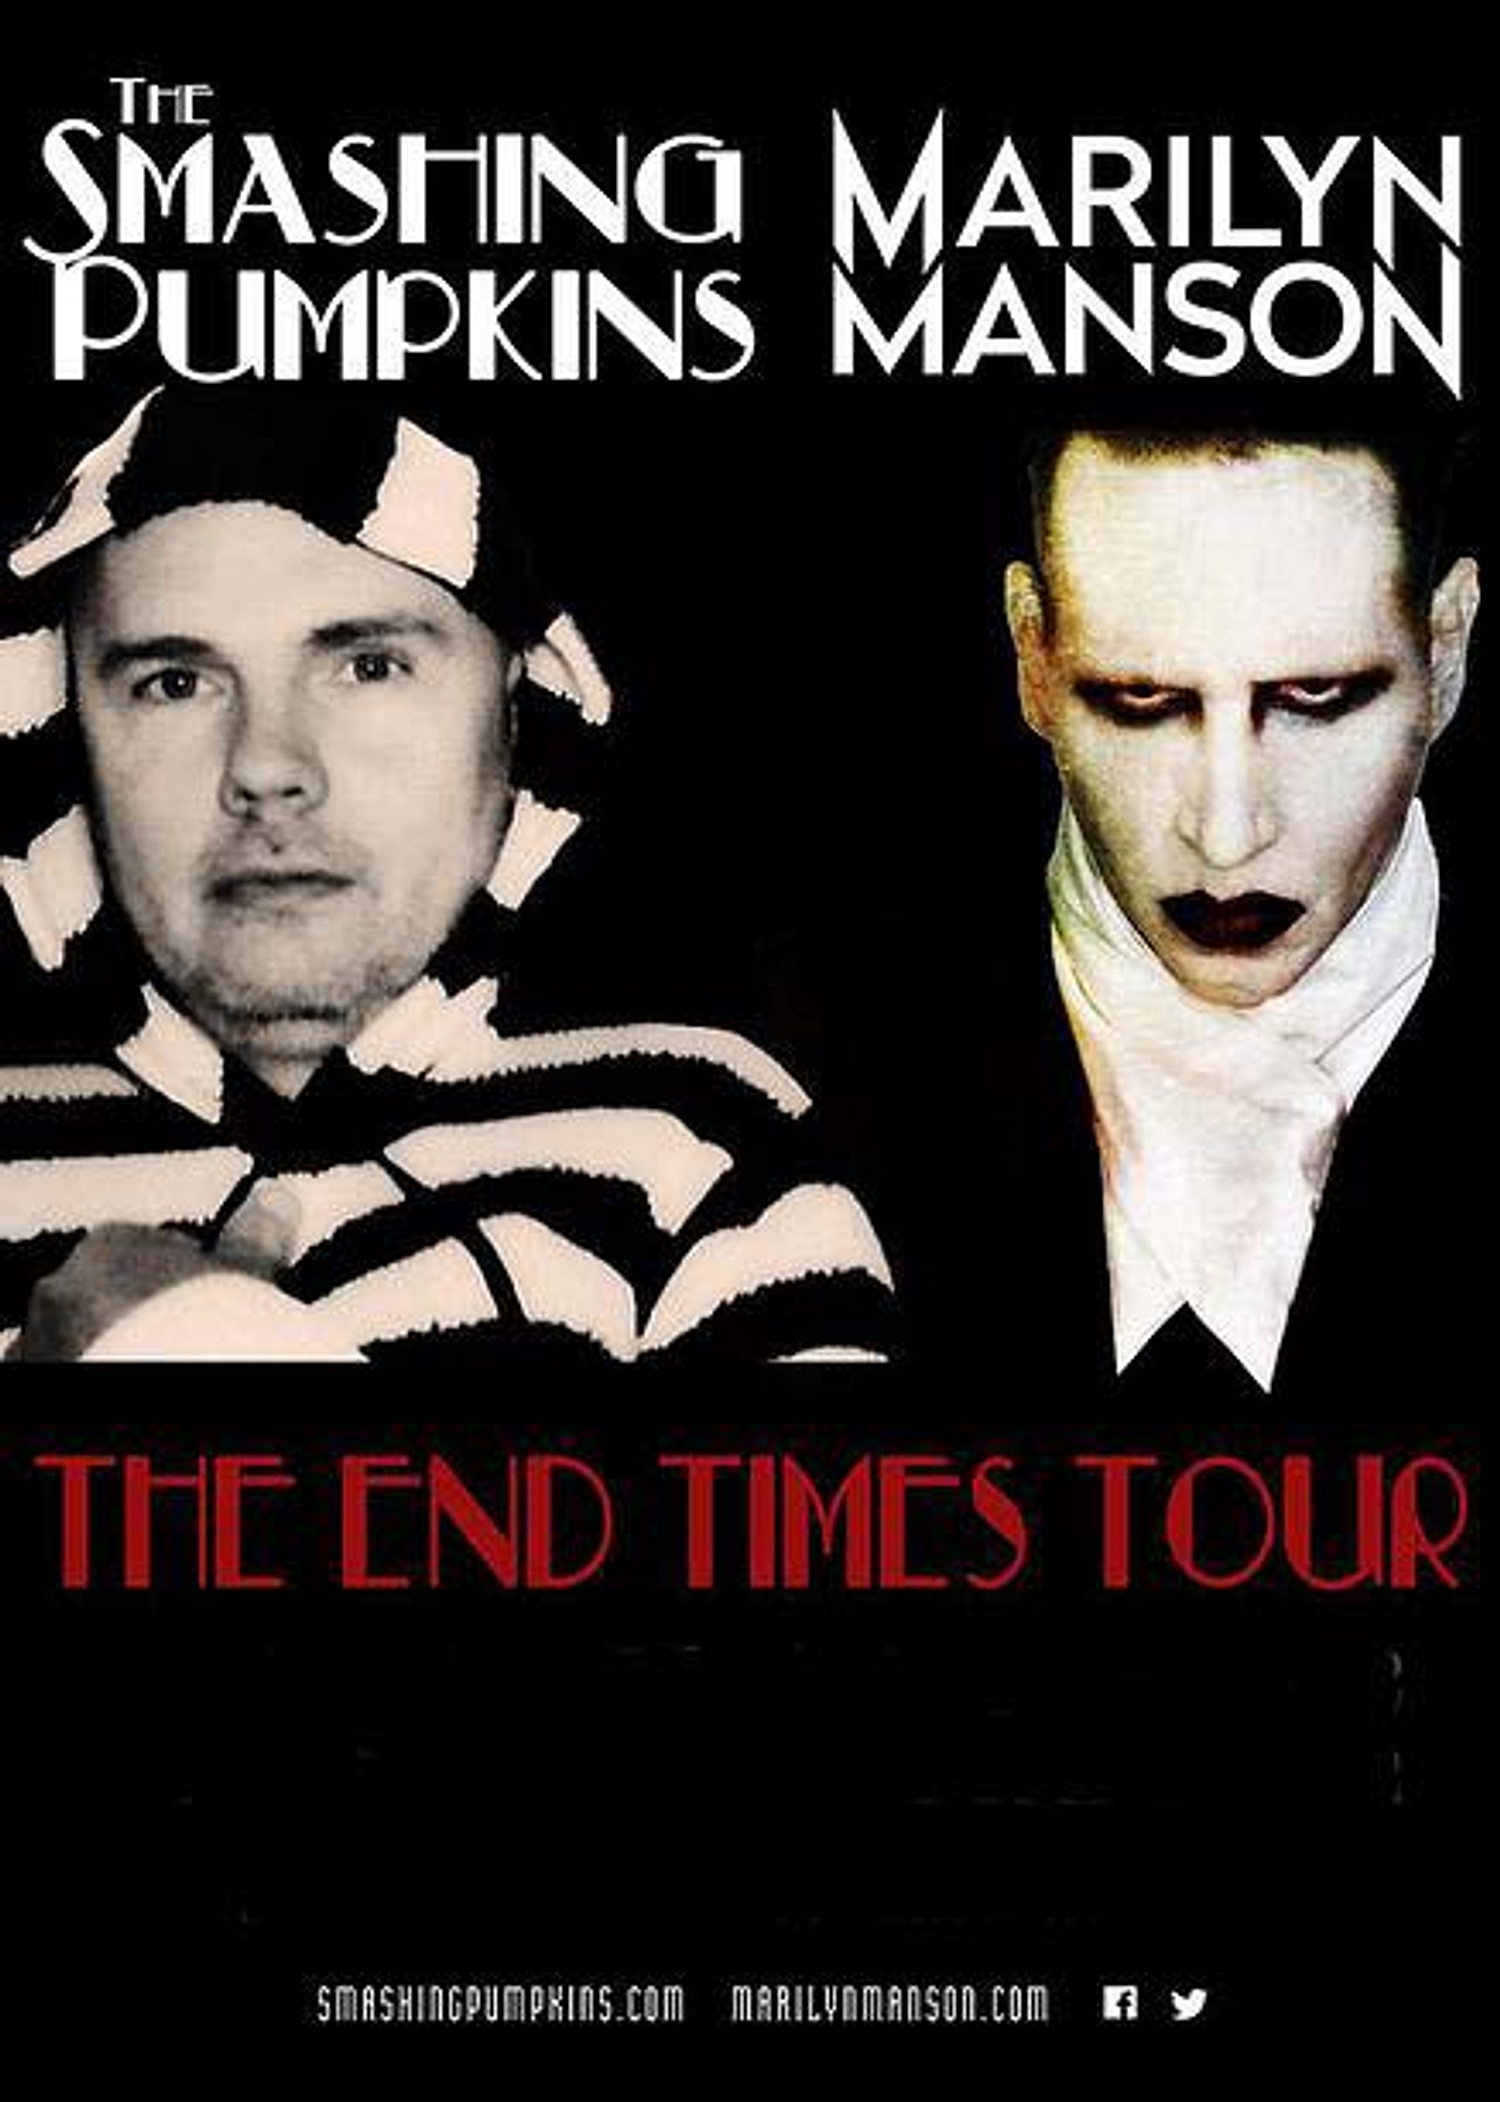 Smashing Pumpkins and Marilyn Manson team up for North American tour